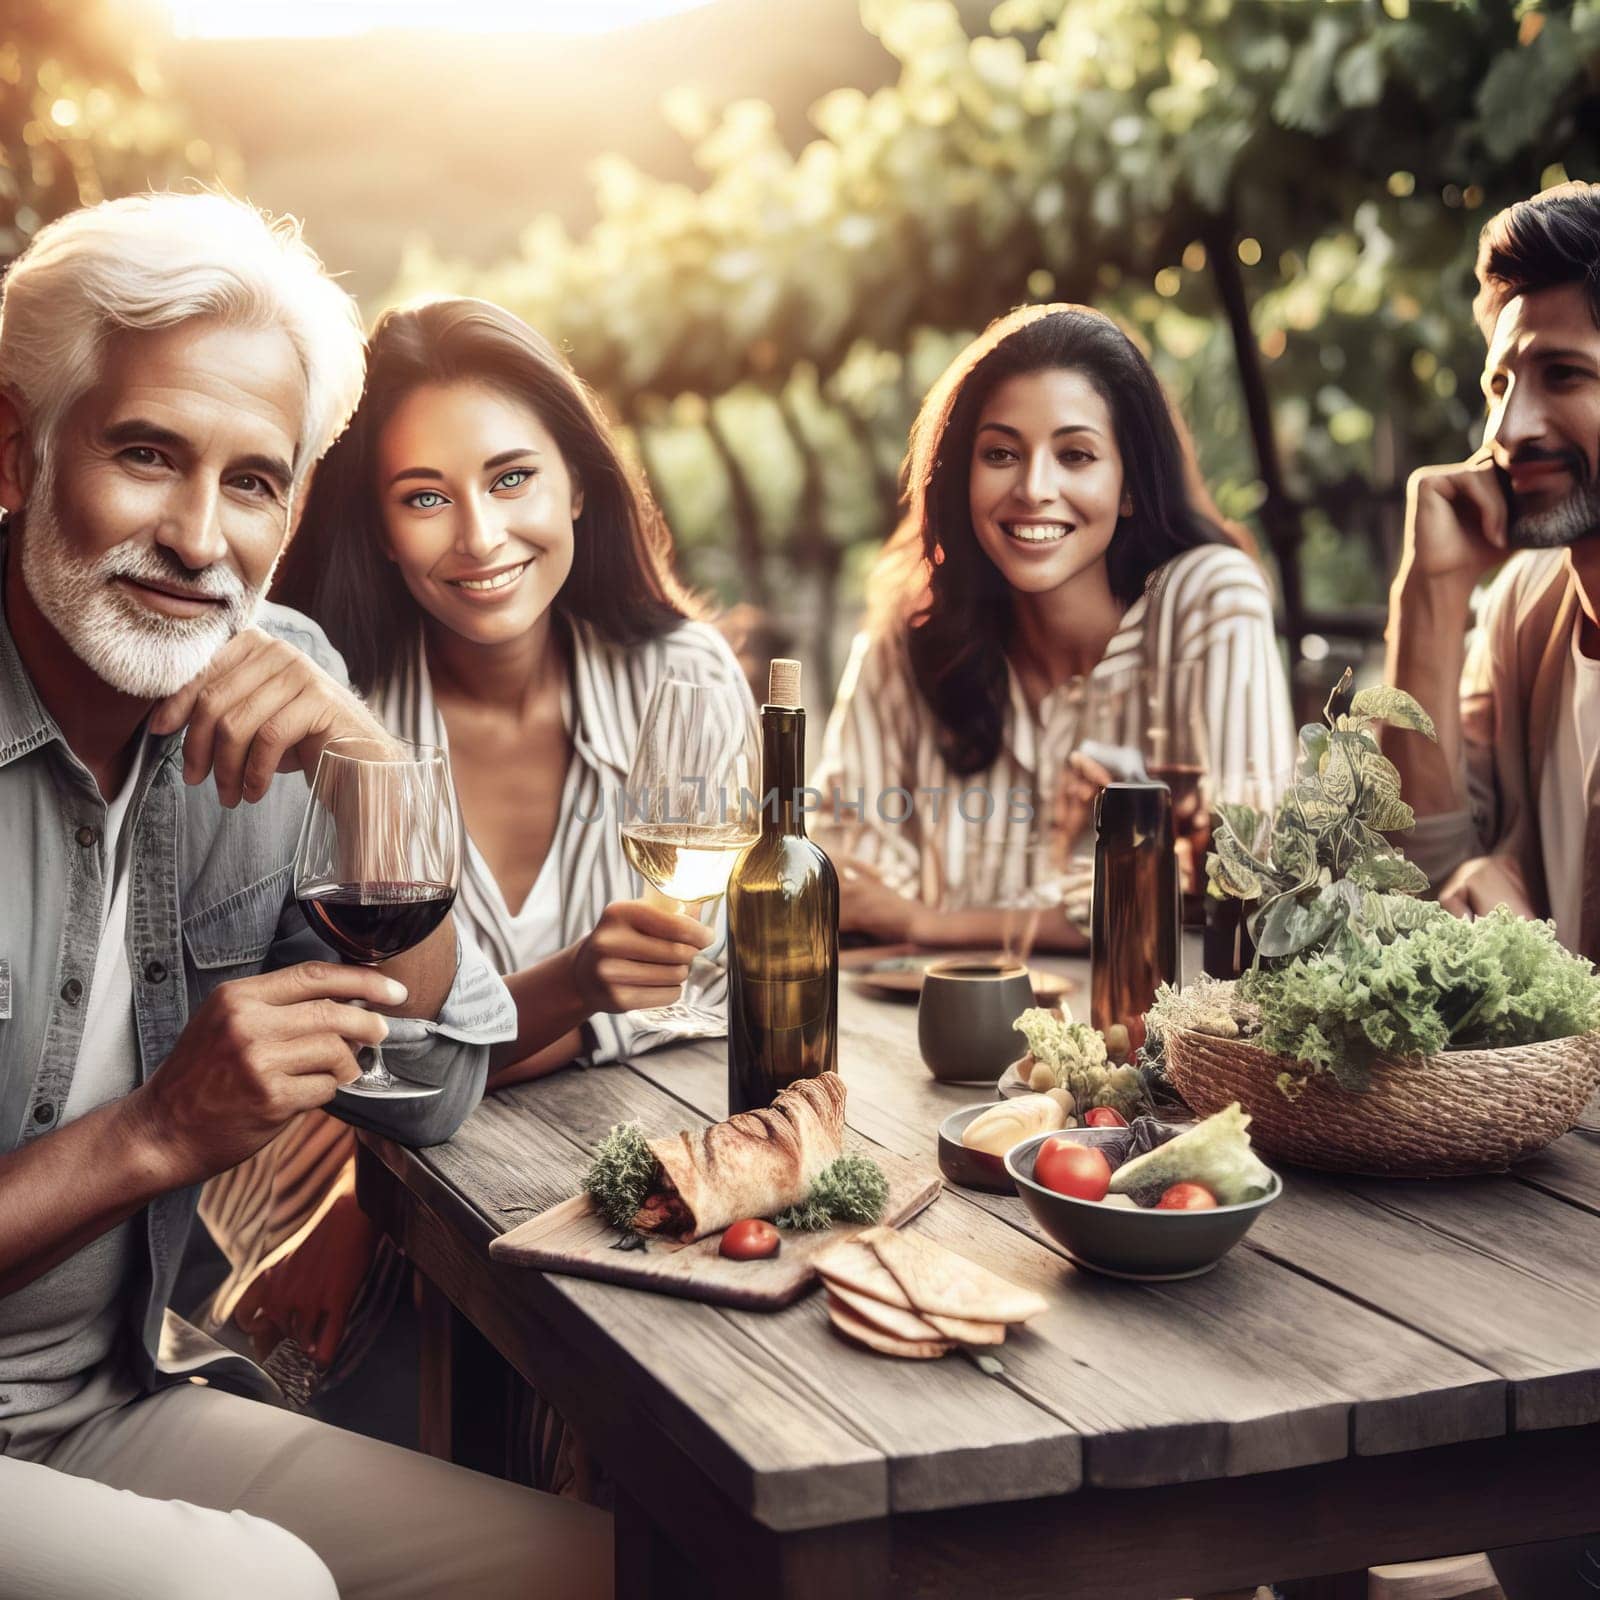 Friends enjoying a summer garden party with wine and food on a rustic wooden table